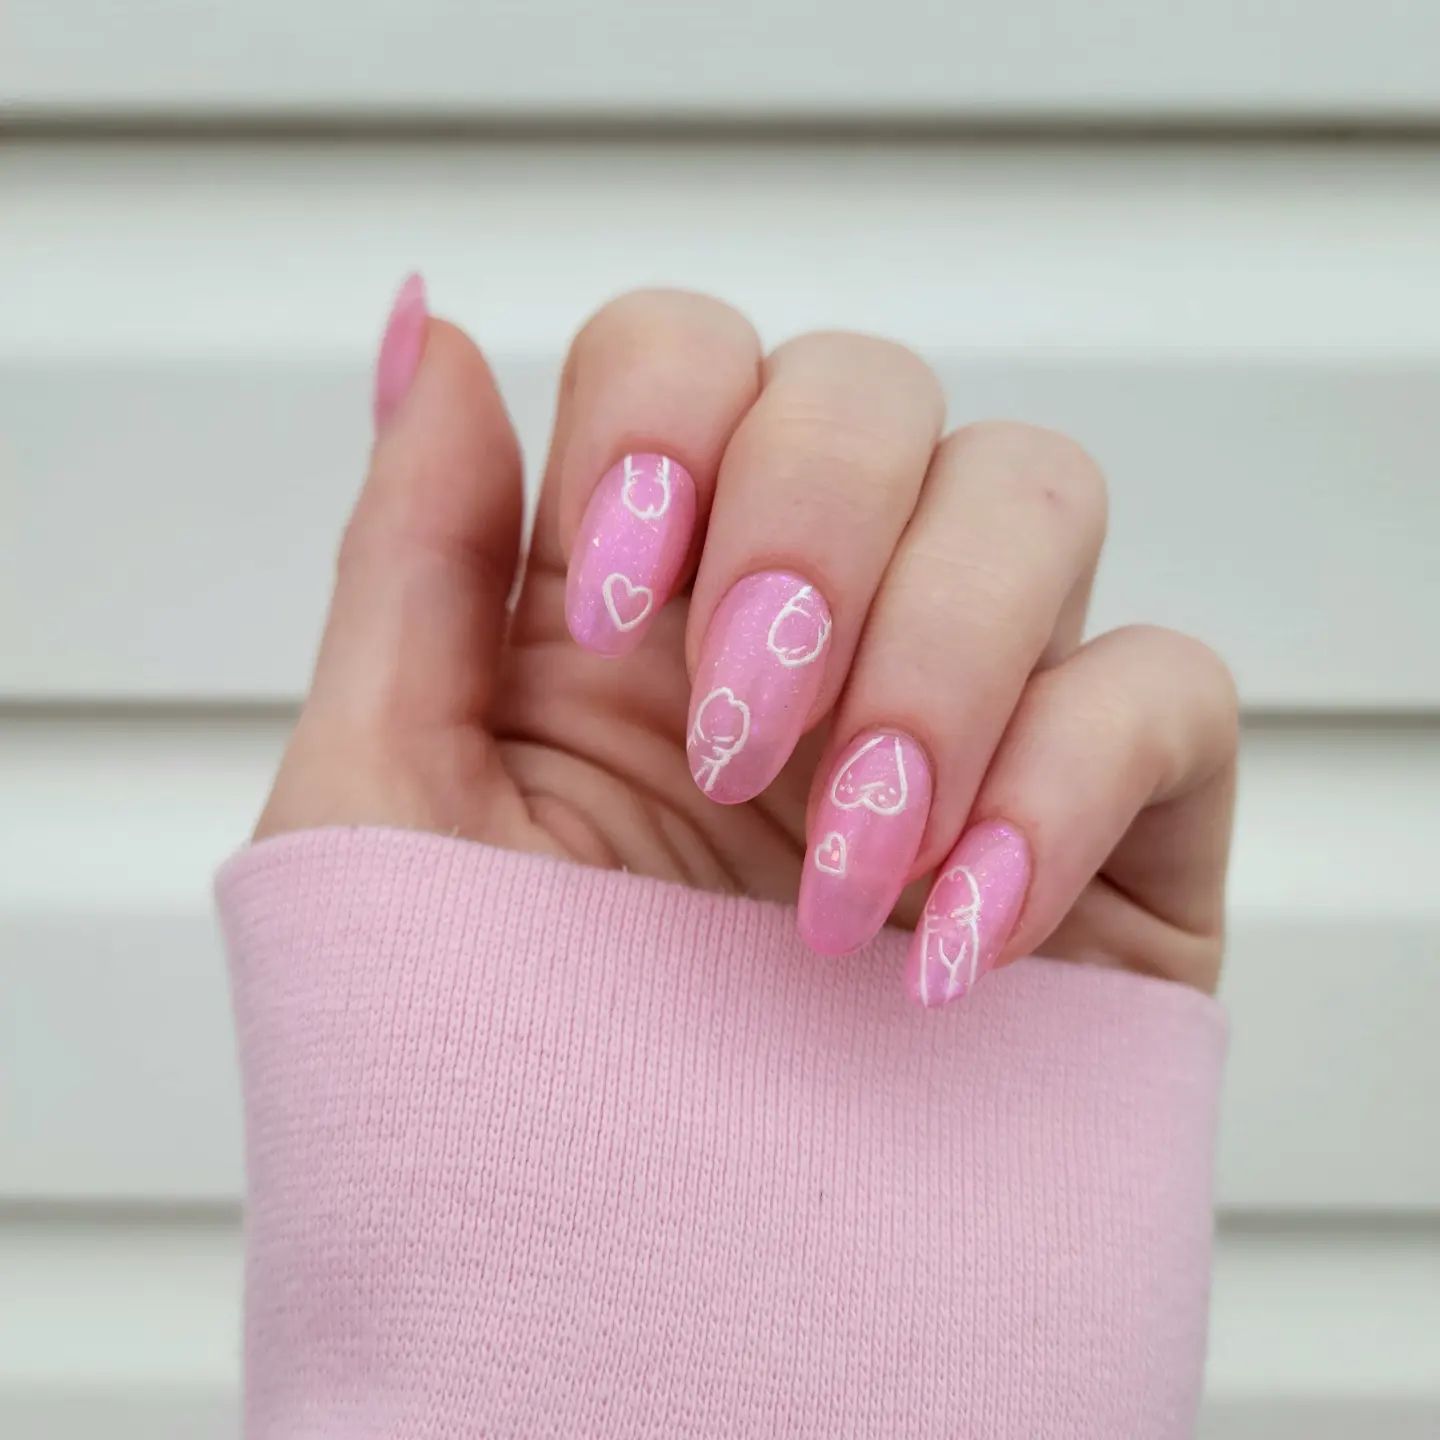 If you don't want everyone to notice your penis-themed nails easily, you can use white liner to make it.